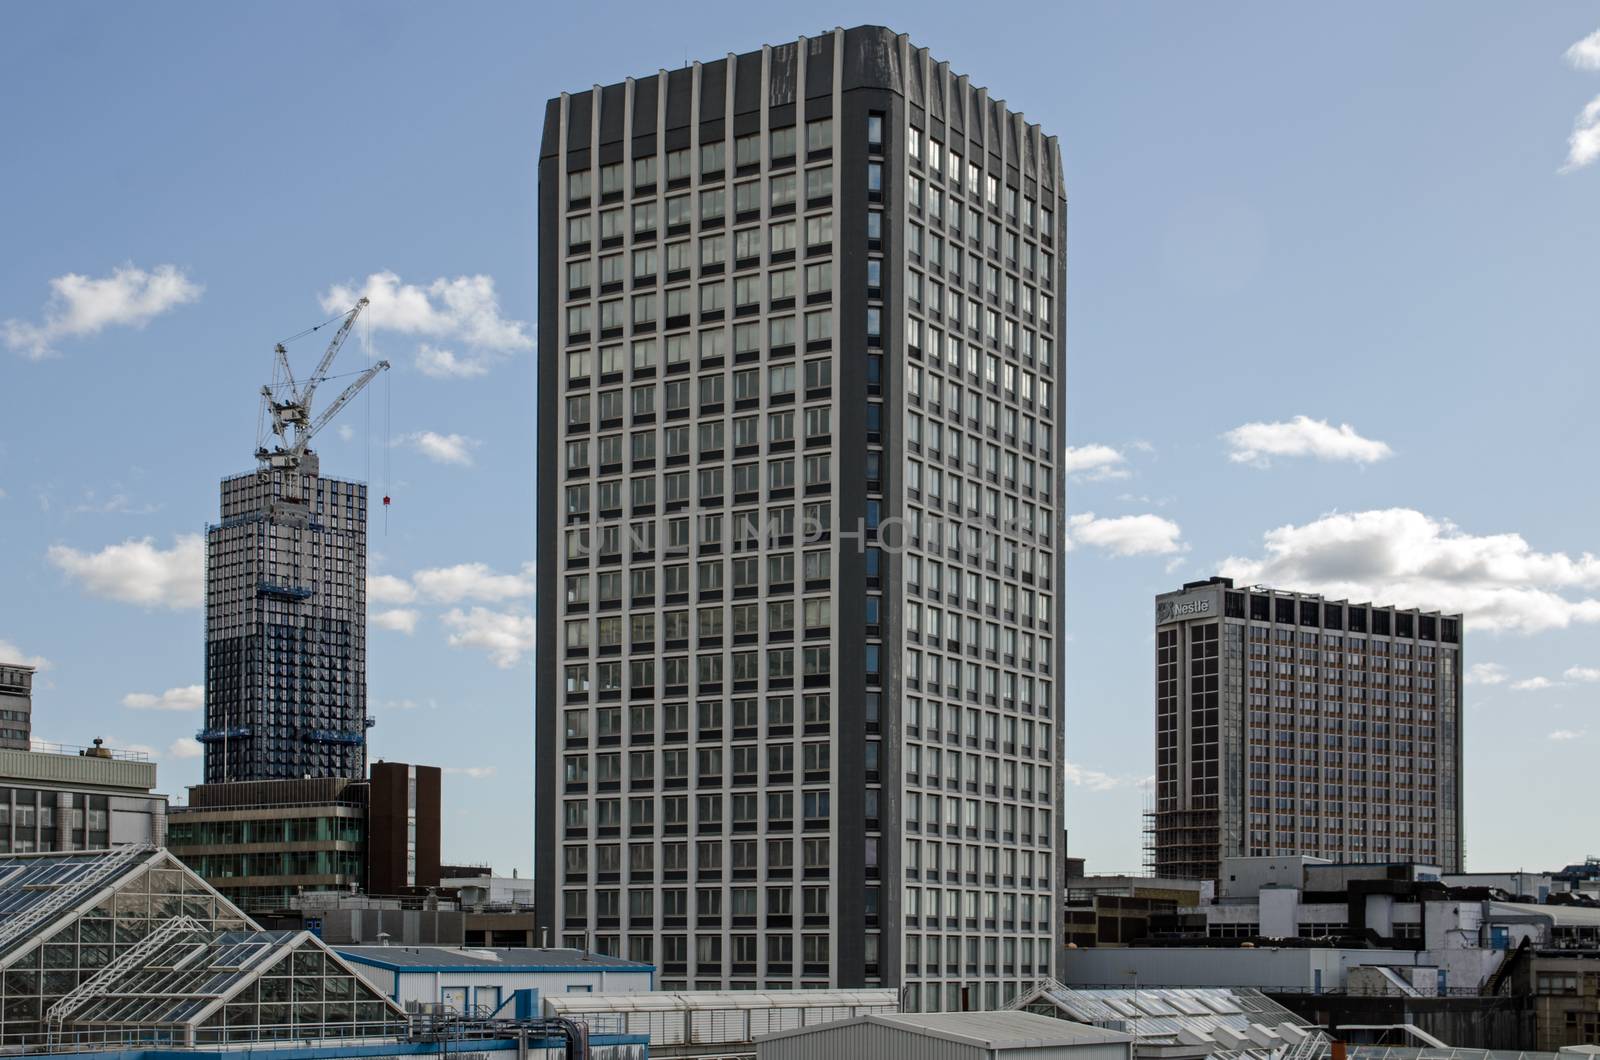 Tall  buildings including one of the Whitgift Centre office block and the former headquarters of Nestle in the centre of Croydon, South London.